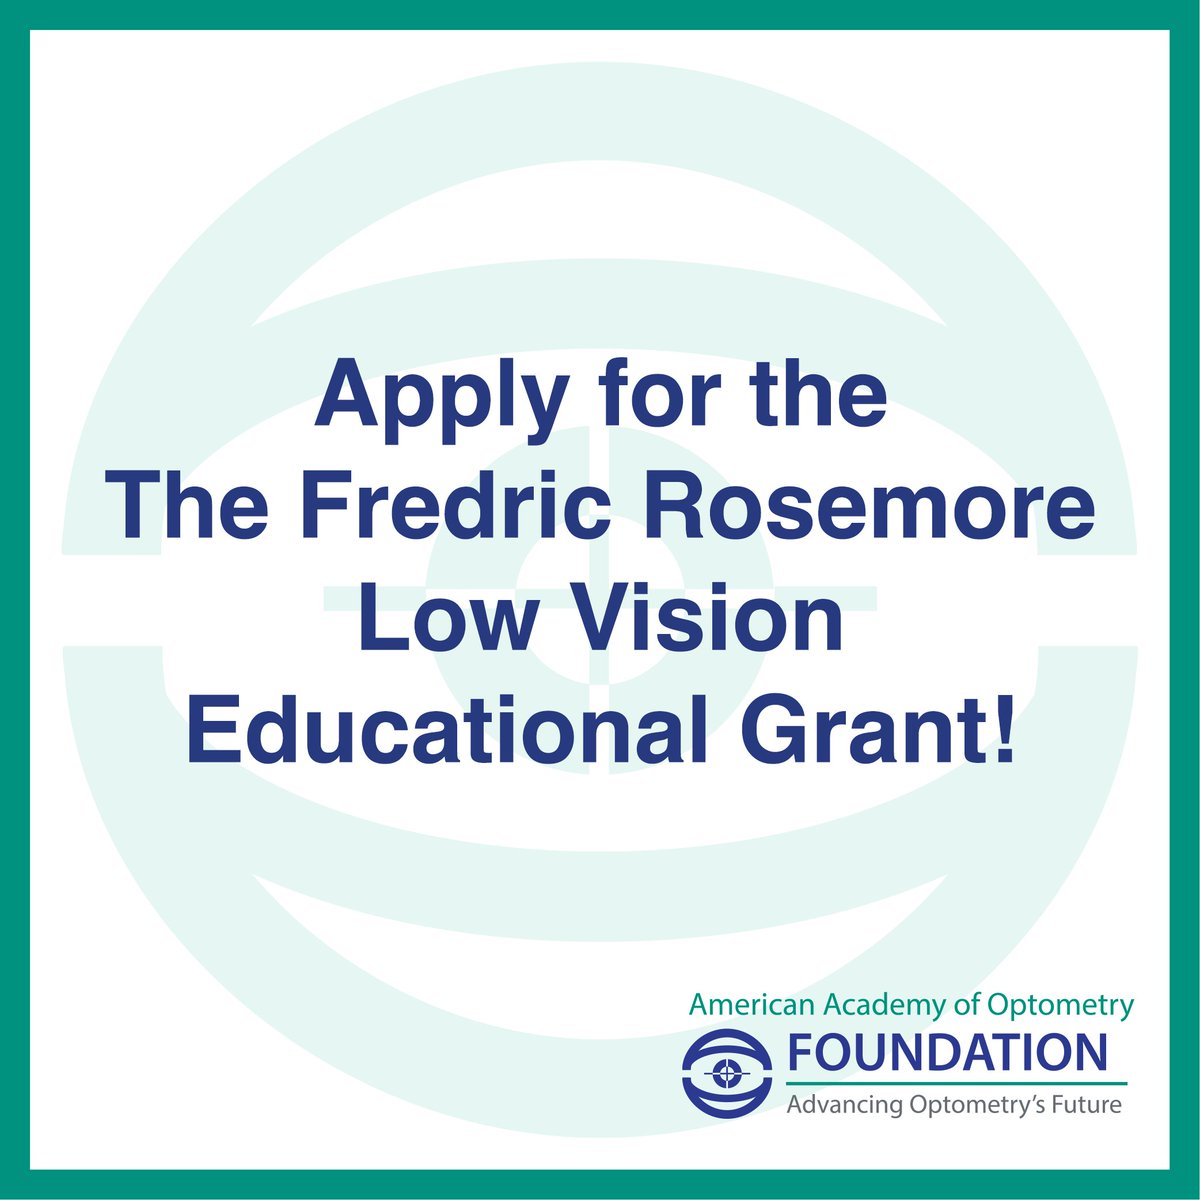 Applications for The Fredric Rosemore Low Vision Educational Grant are now open. The application window closes June 3, 2024. Click here for more information: bit.ly/3TxD4ch #Optometry #Fellows